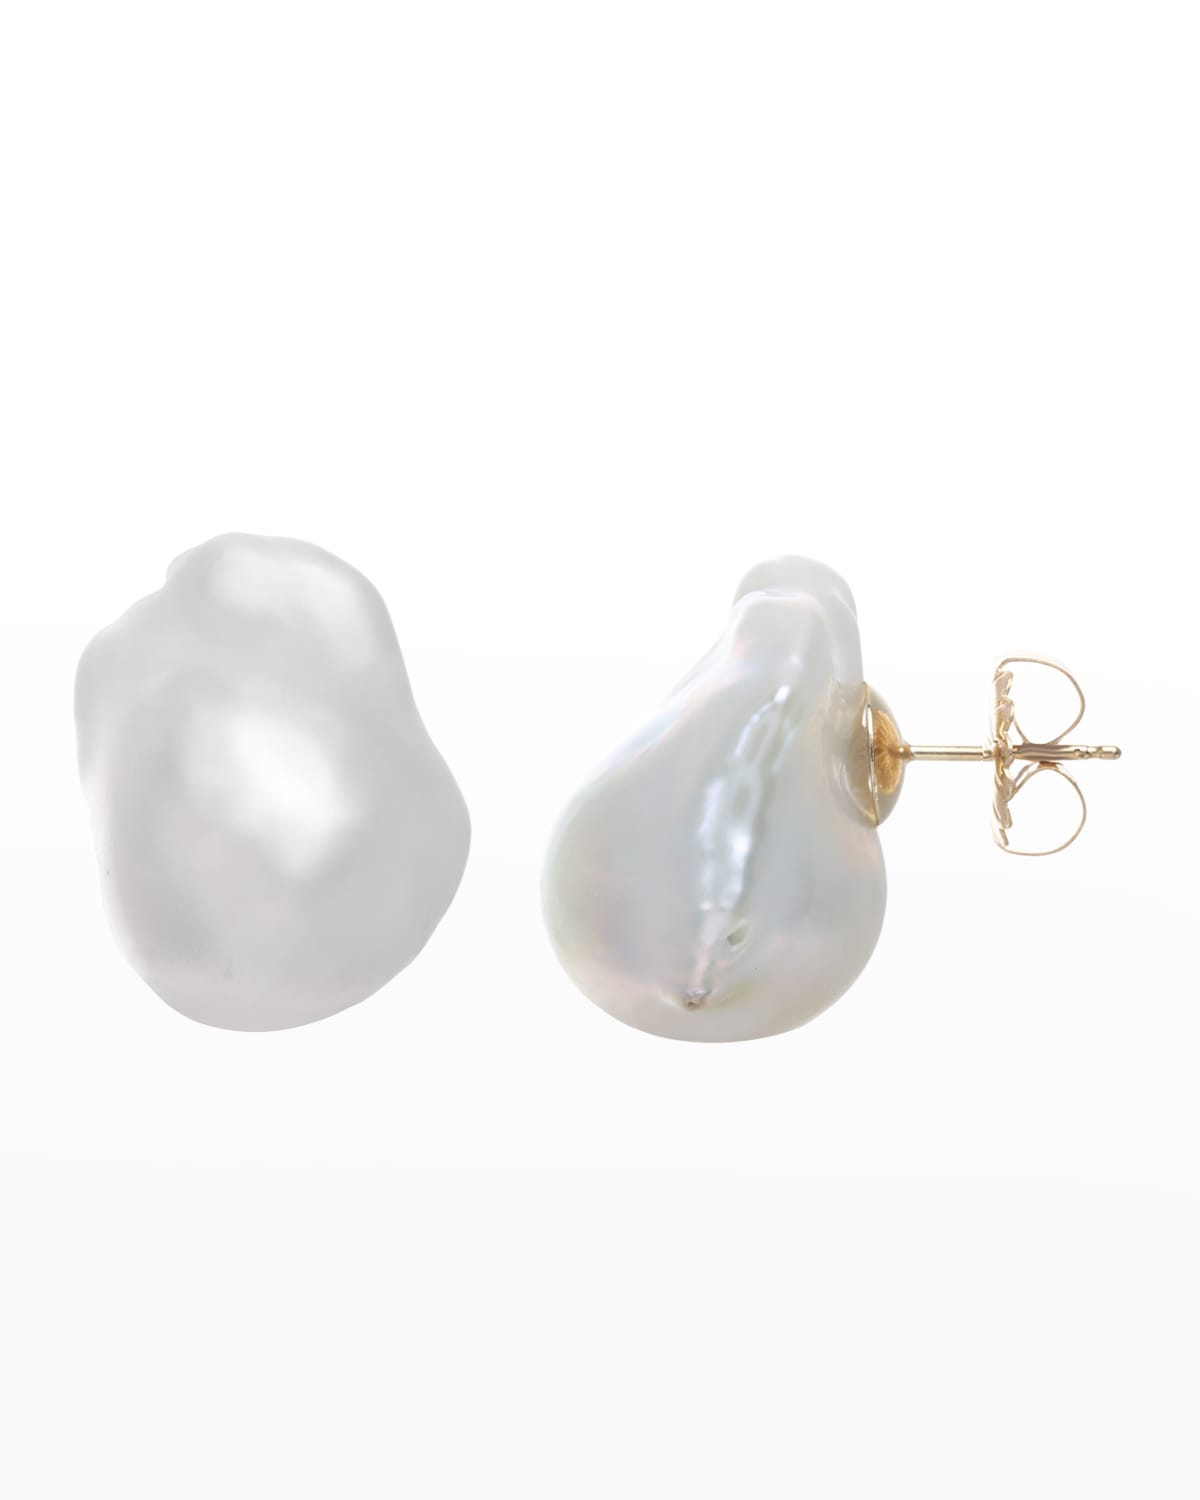 Margo Morrison White Baroque Pearl Earrings In 14k Yellow Gold Posts In Pink